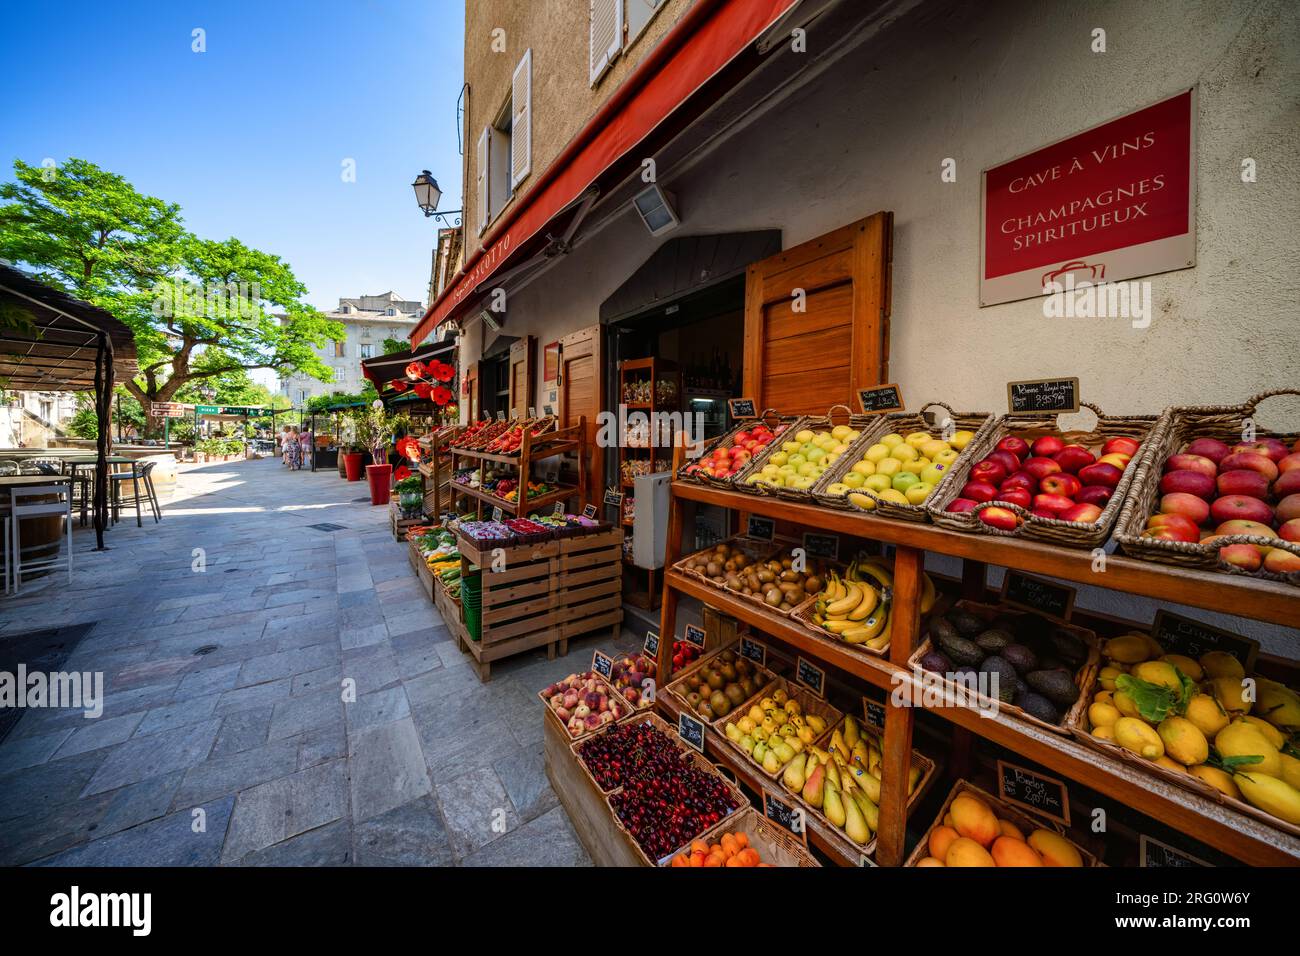 Fruit and vegetable shop in Saint-Florent, Corsica island, France Stock Photo